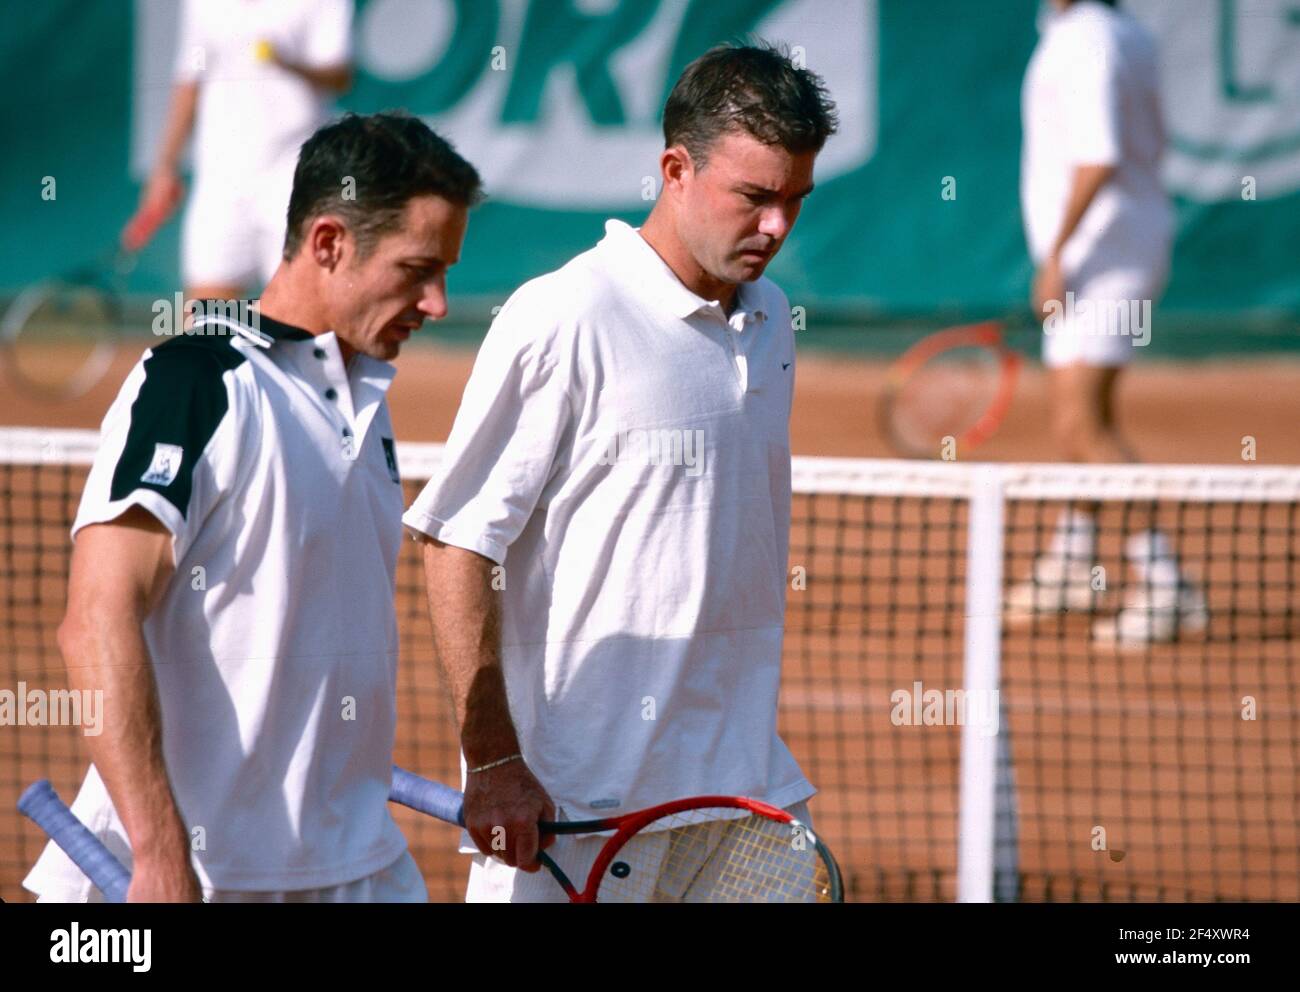 American tennis players Devin Bowen and Ashley Fisher, 2003 Stock Photo -  Alamy